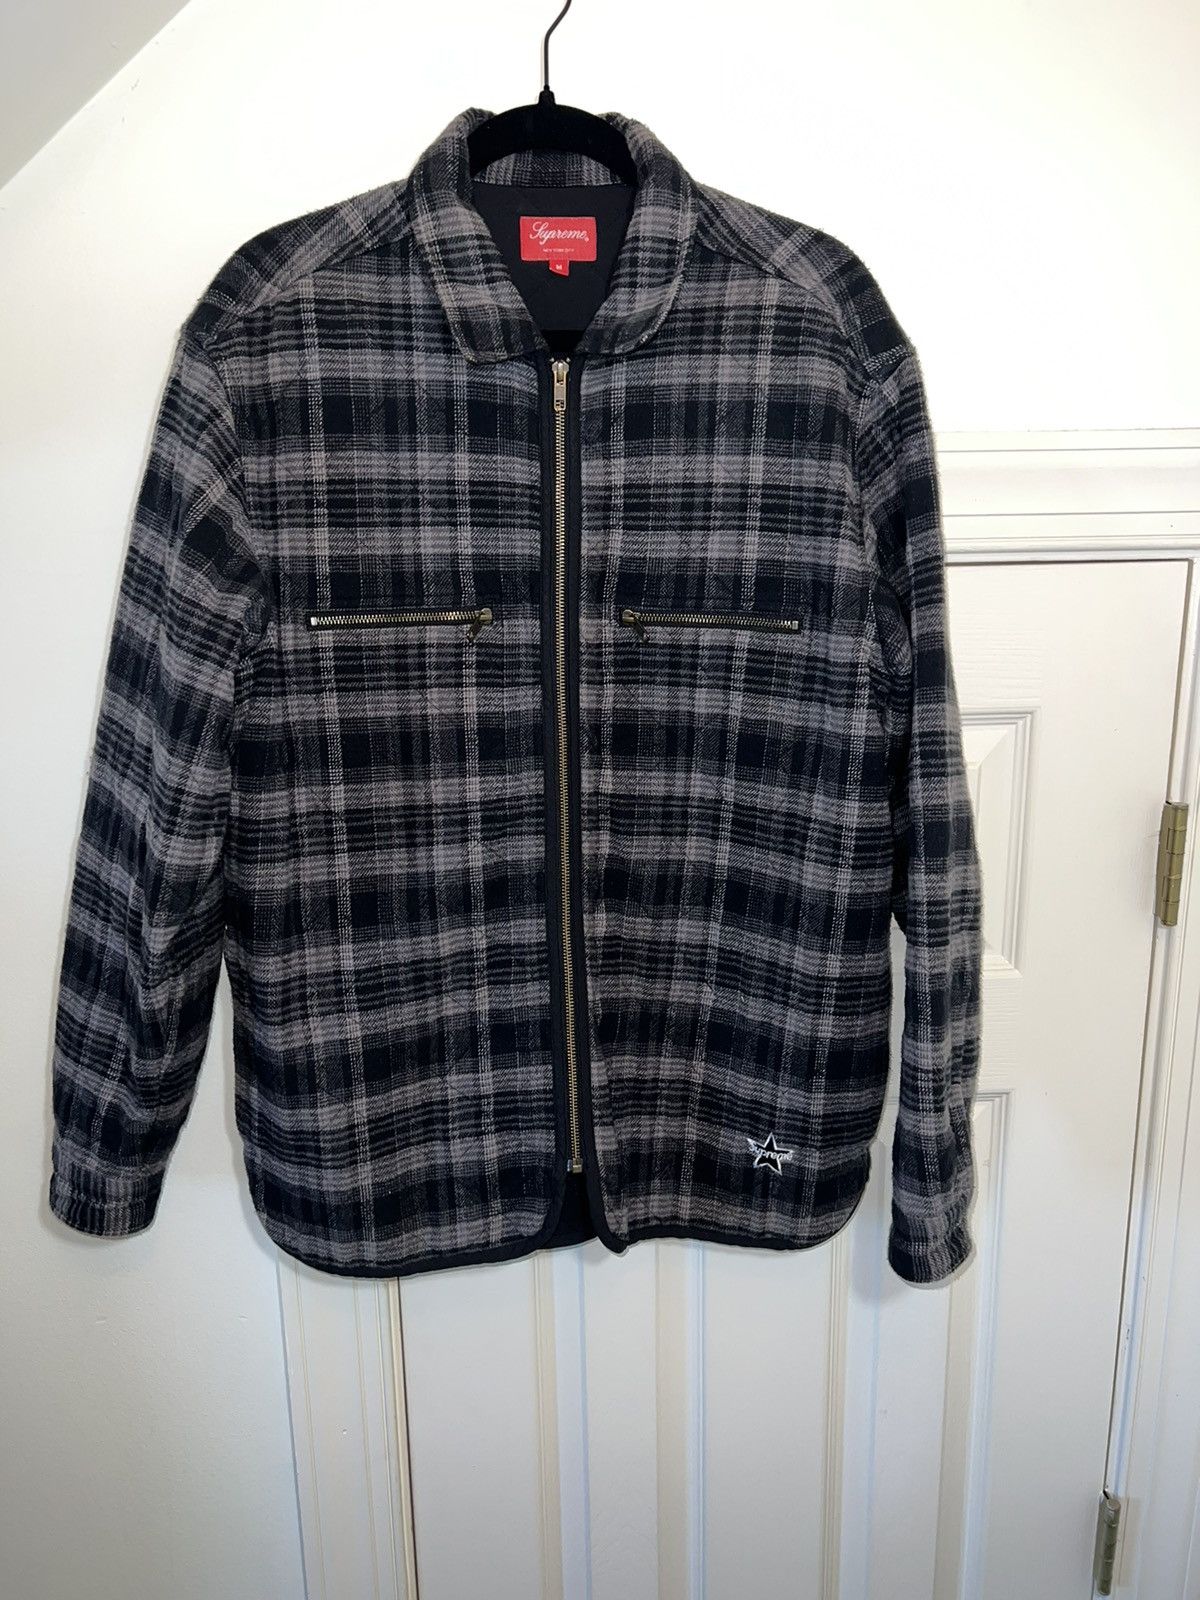 Supreme Supreme Quilted Plaid Zip Up Shirt Jacket | Grailed